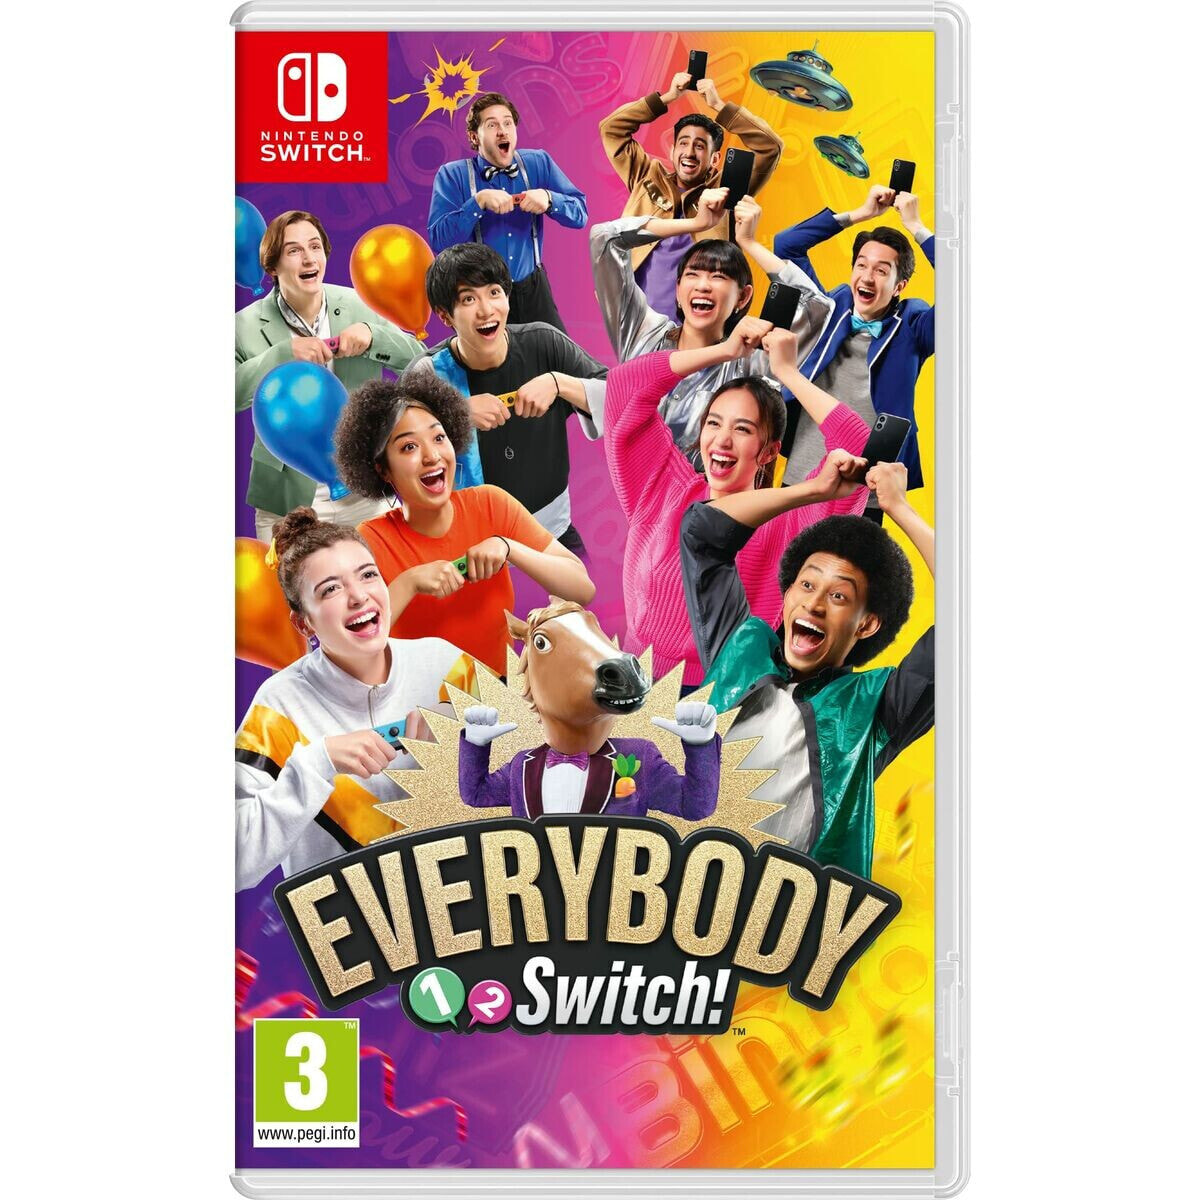 Video game for Switch Nintendo EVERYBODY 1-2 SWITCH